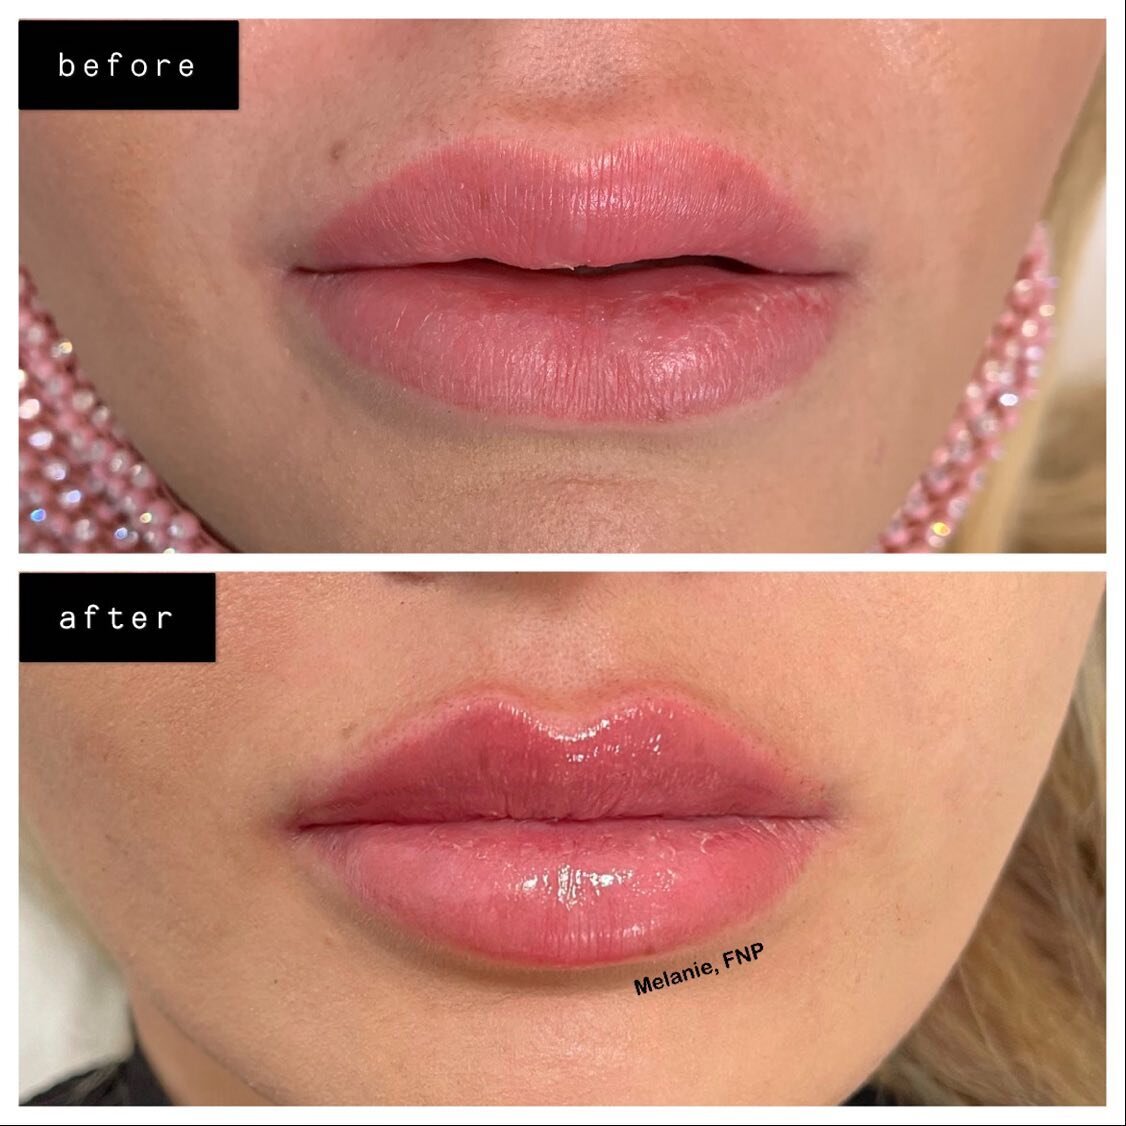 CORRECTION+RUSSIAN LIPS👄💉
{{SWIPE⏮}}
Patient came in unhappy with her lip shape done by previous injectors. One session of dissolver was done to remove unwanted/misplaced filler in different parts of the lip, then 1 full syringe of filler added to 